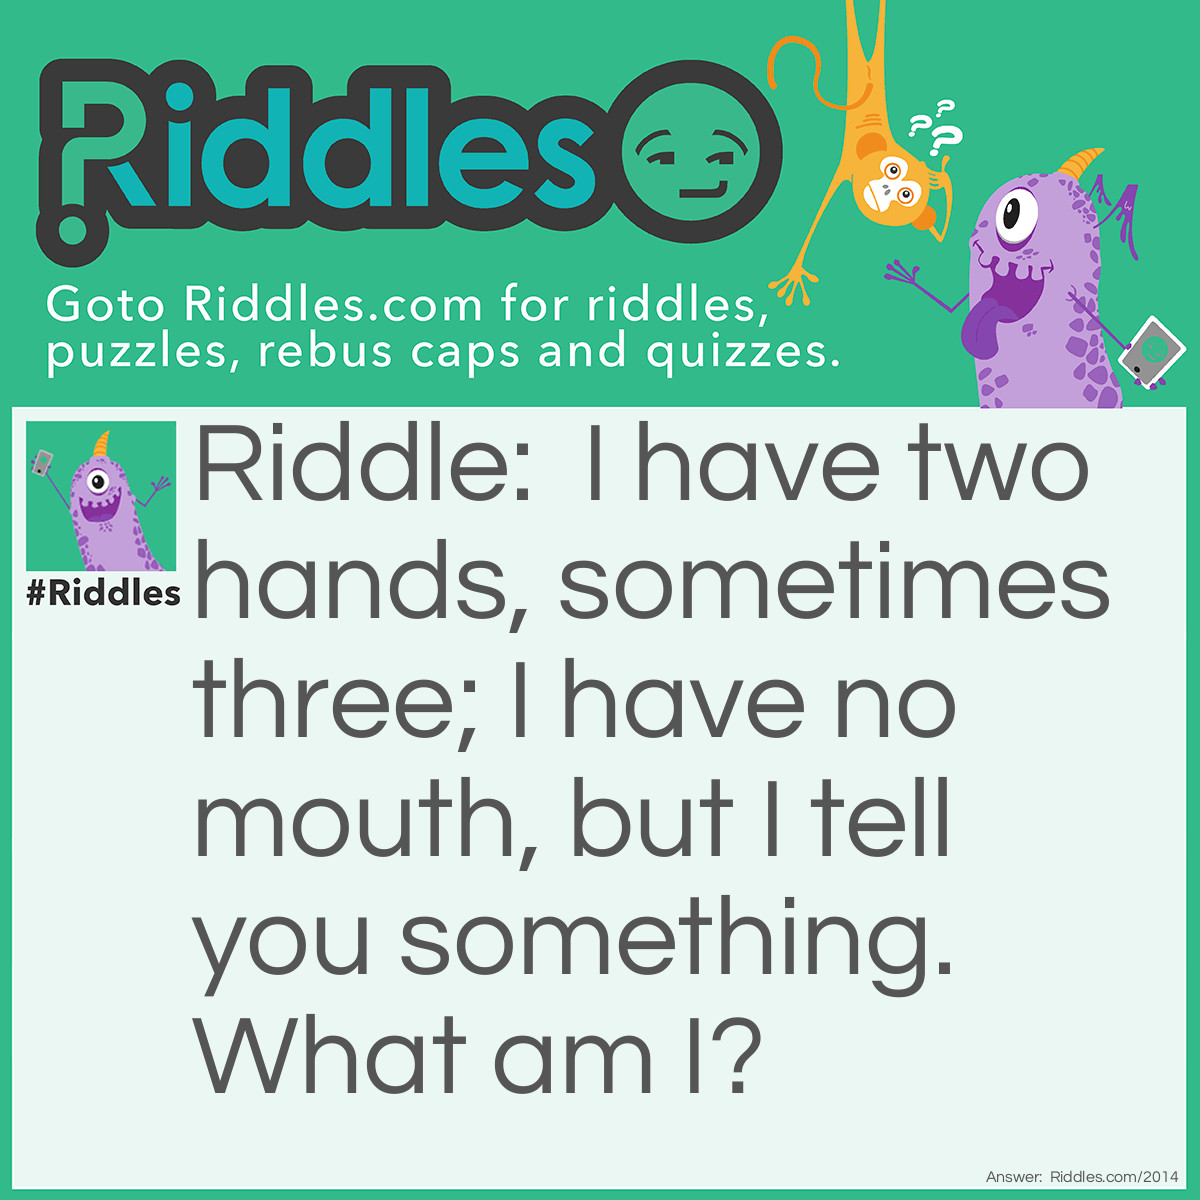 Riddle: I have two hands, sometimes three; 
I have no mouth, but I tell you something. 
What am I? Answer: An analog clock or watch.